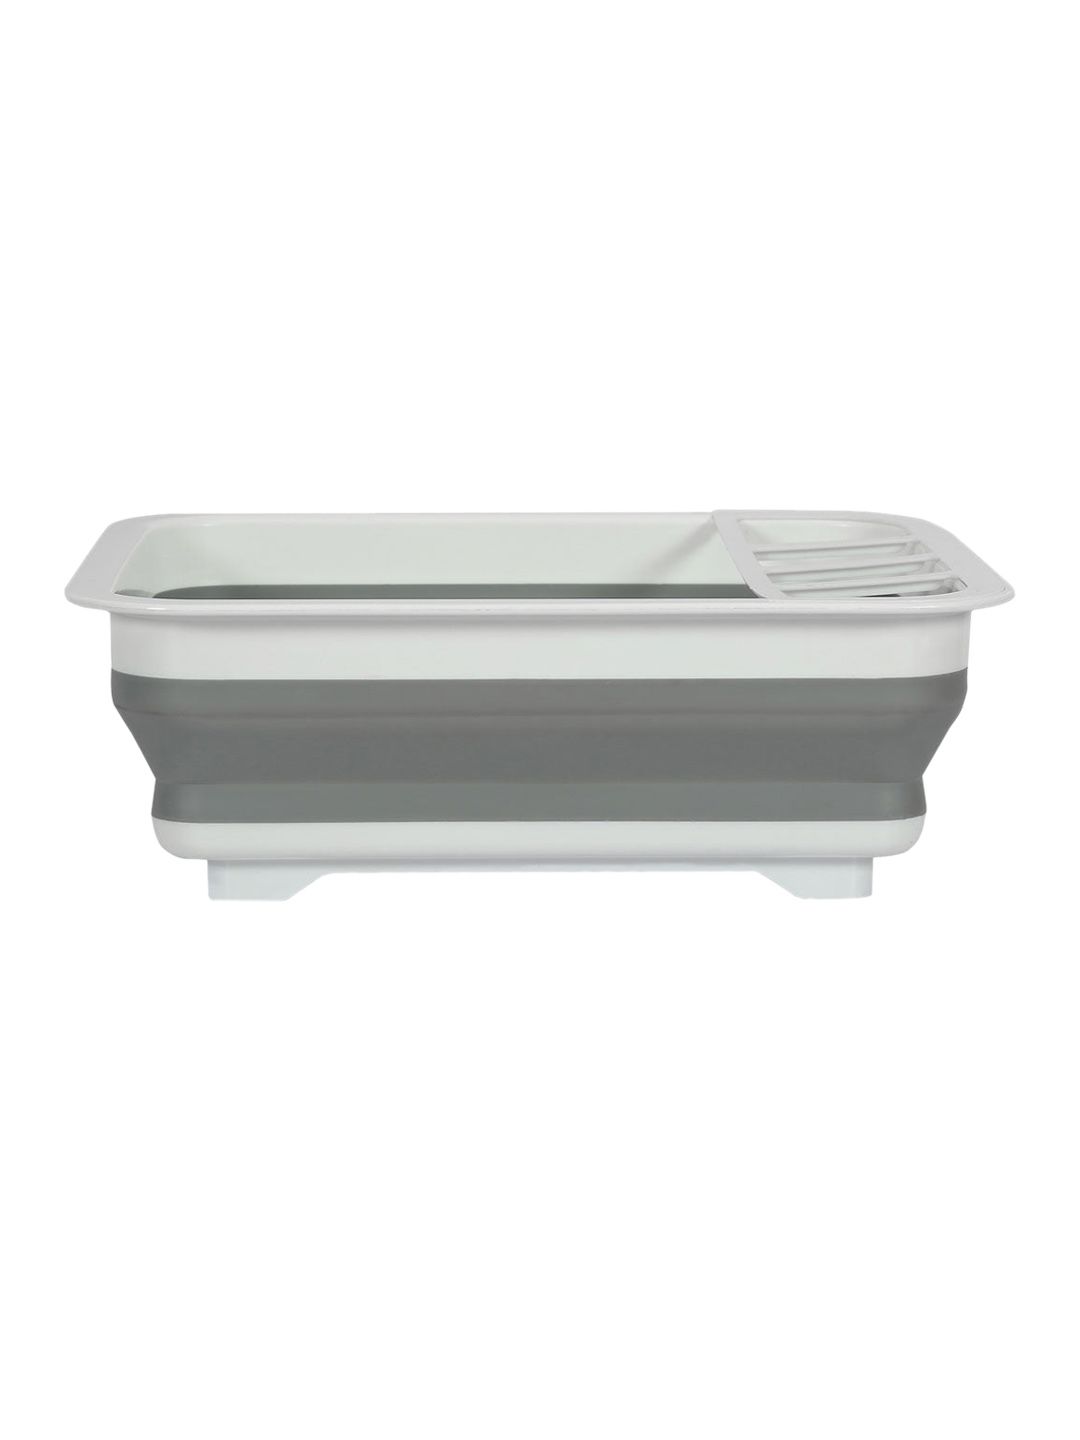 Athome by Nilkamal White & Grey Collapsible Dish Rack Price in India